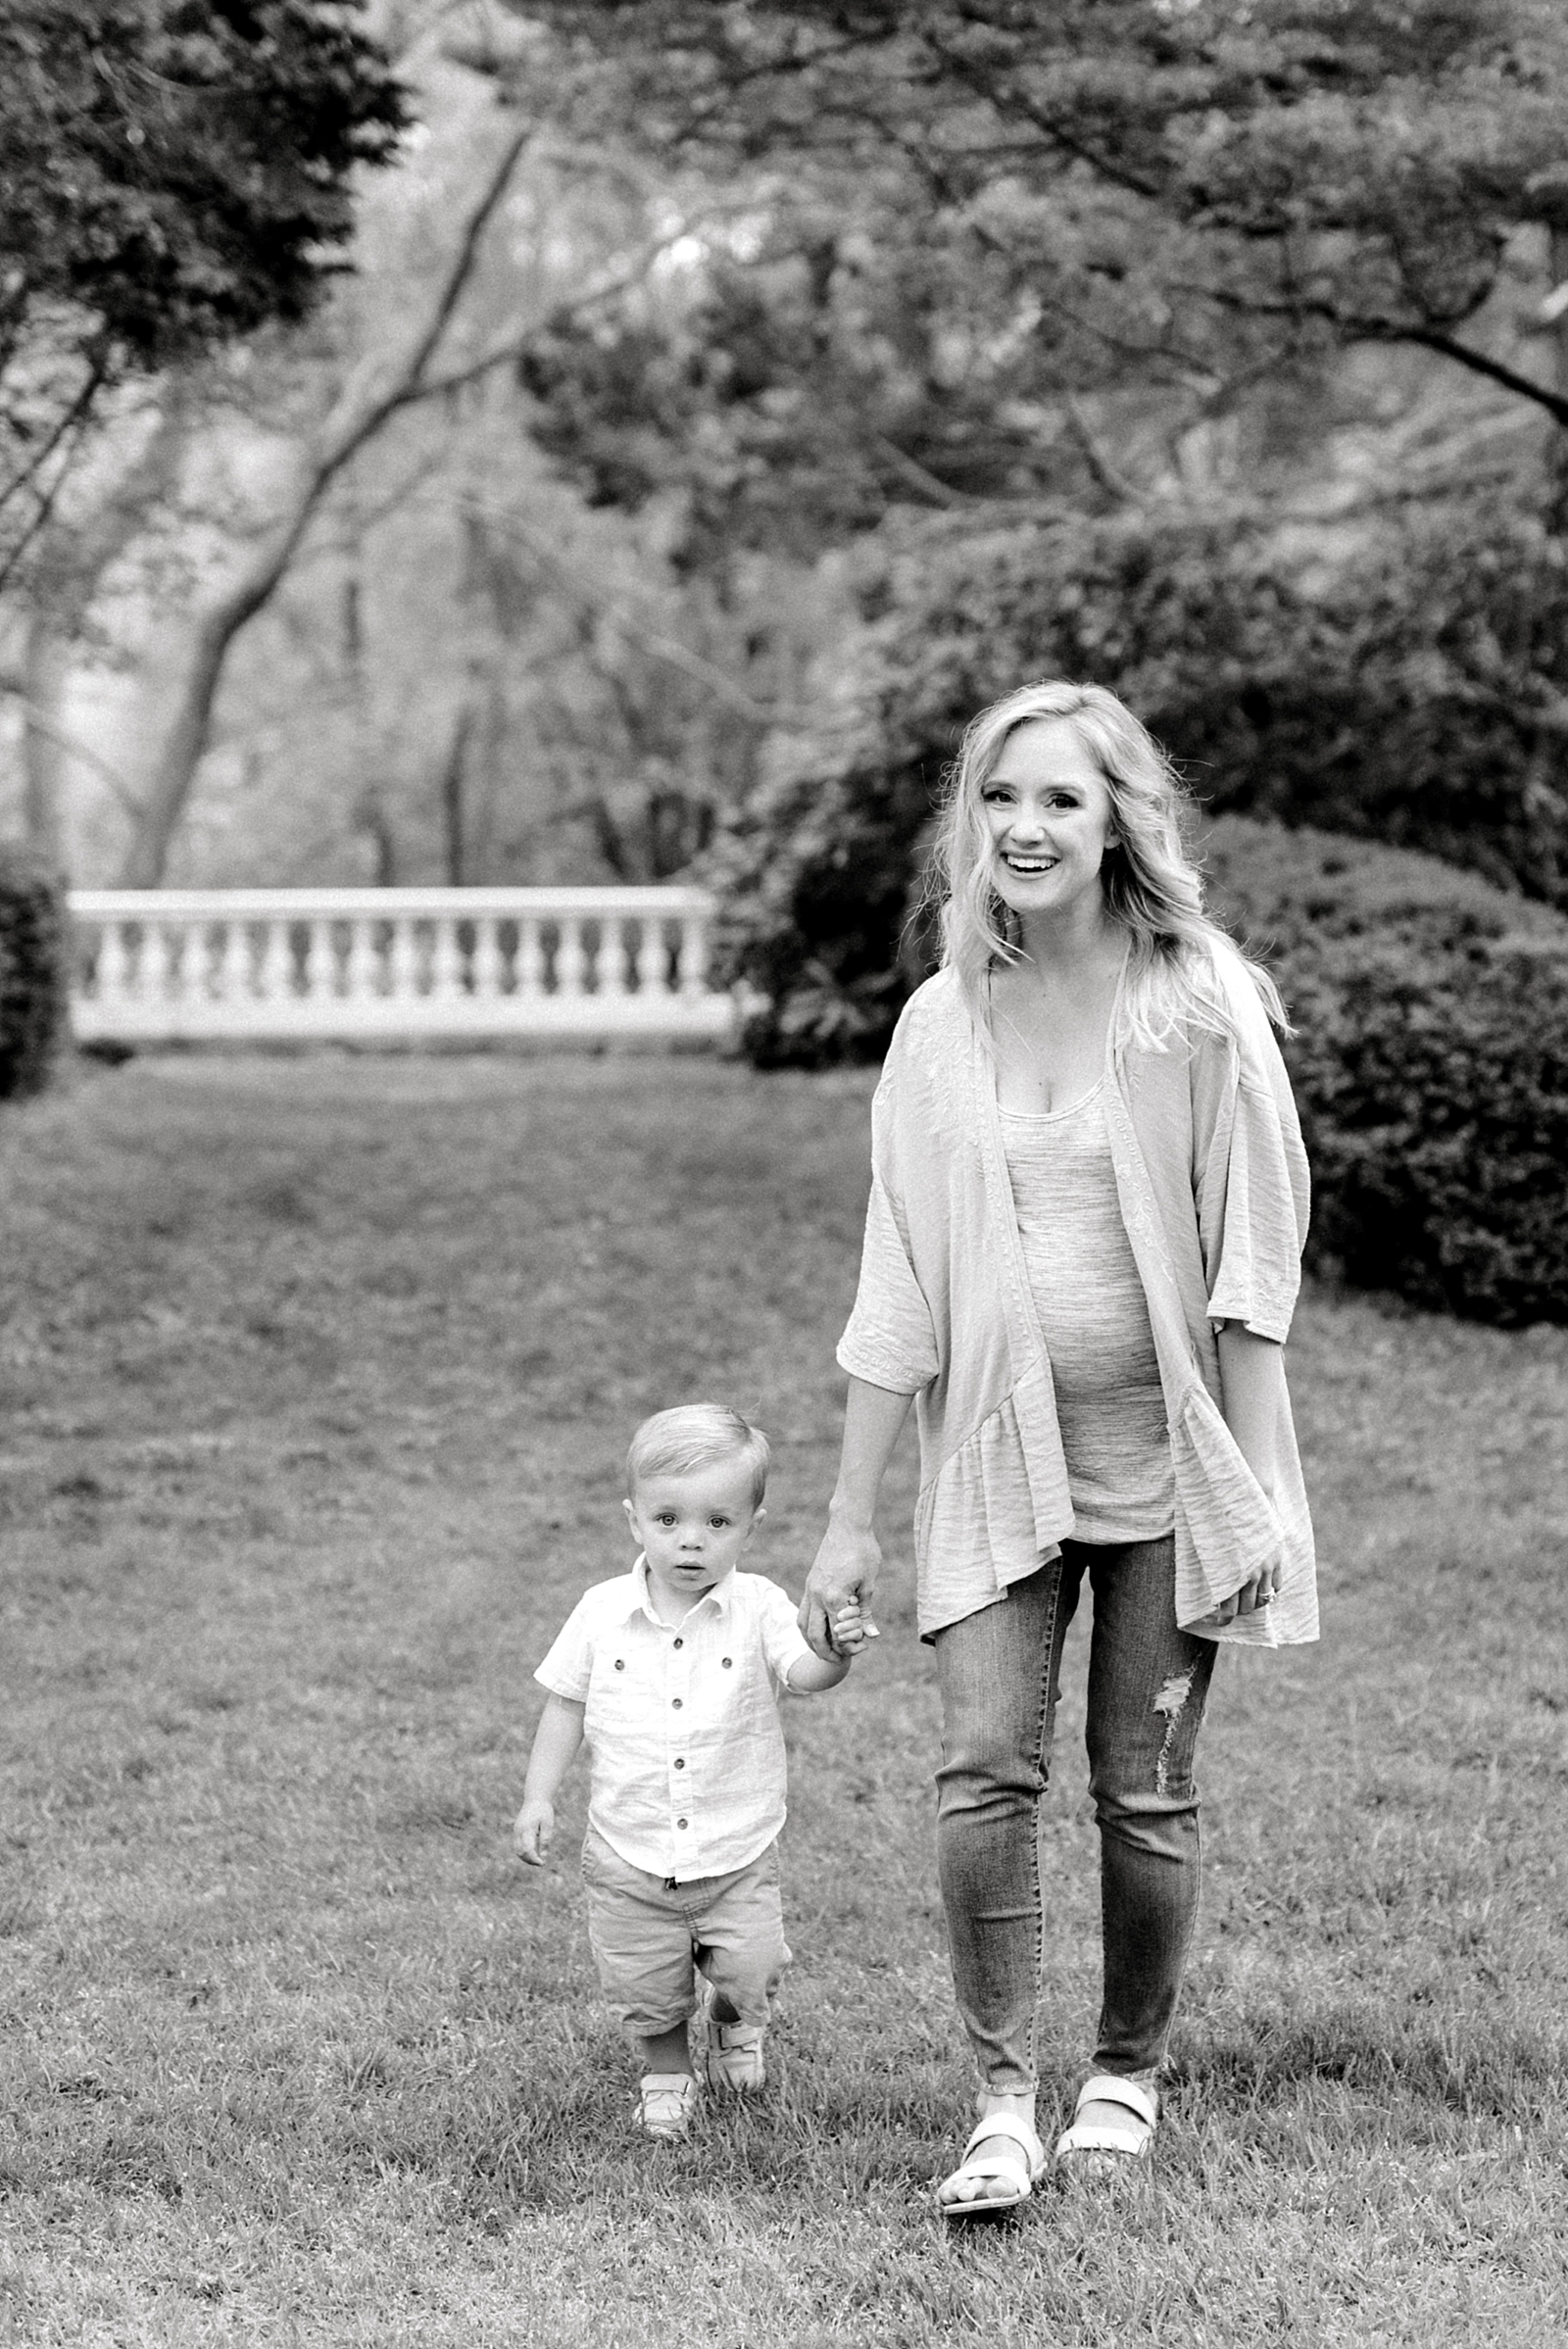 Spring Family Session at Long Hill Reservation in Beverly by Boston Wedding & Portrait Photographer Annmarie Swift